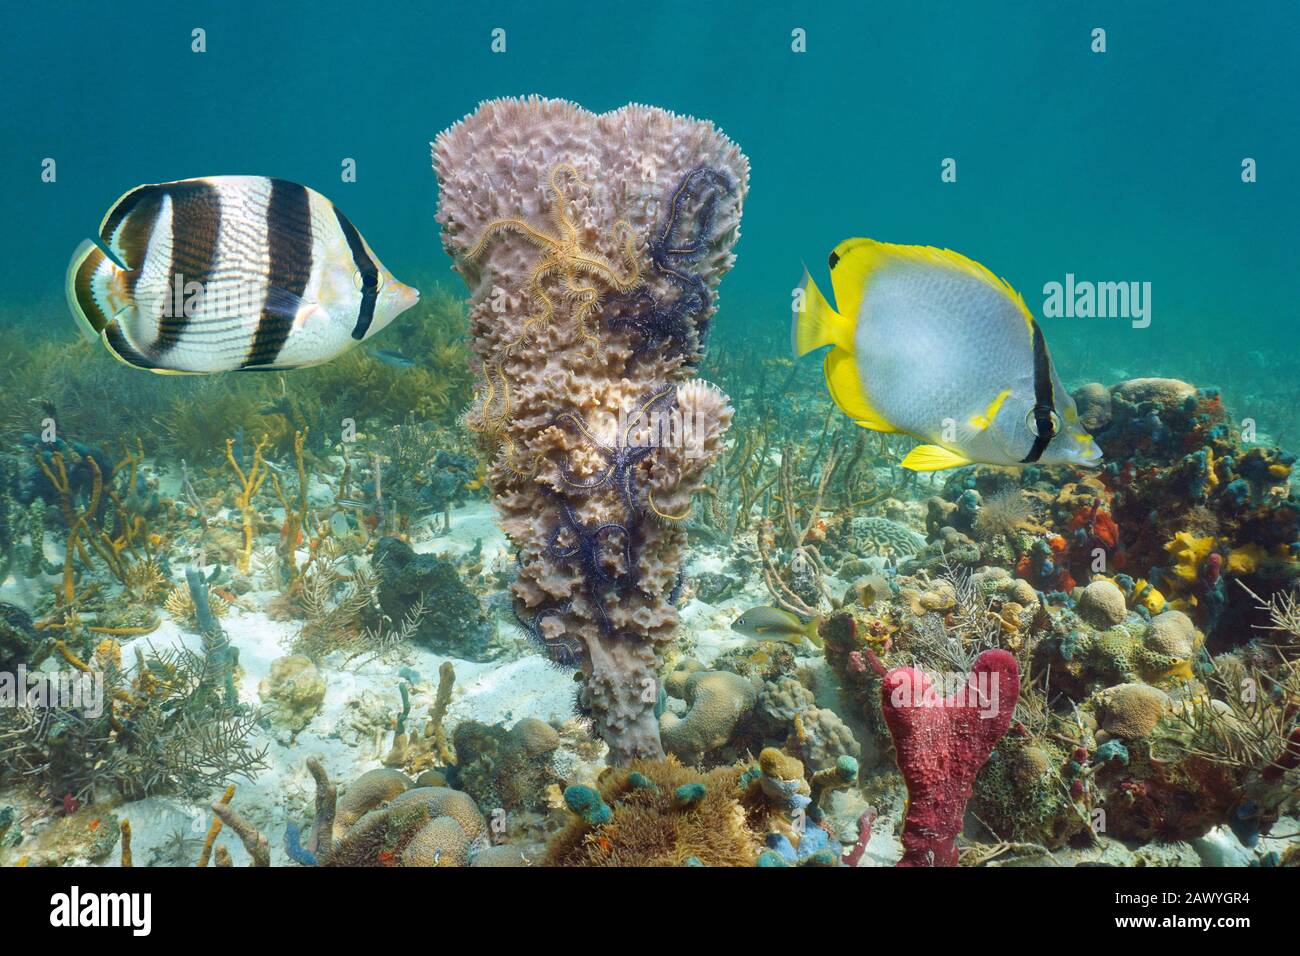 Caribbean sea marine life, butterflyfish with sponge and brittle stars underwater in a coral reef Stock Photo